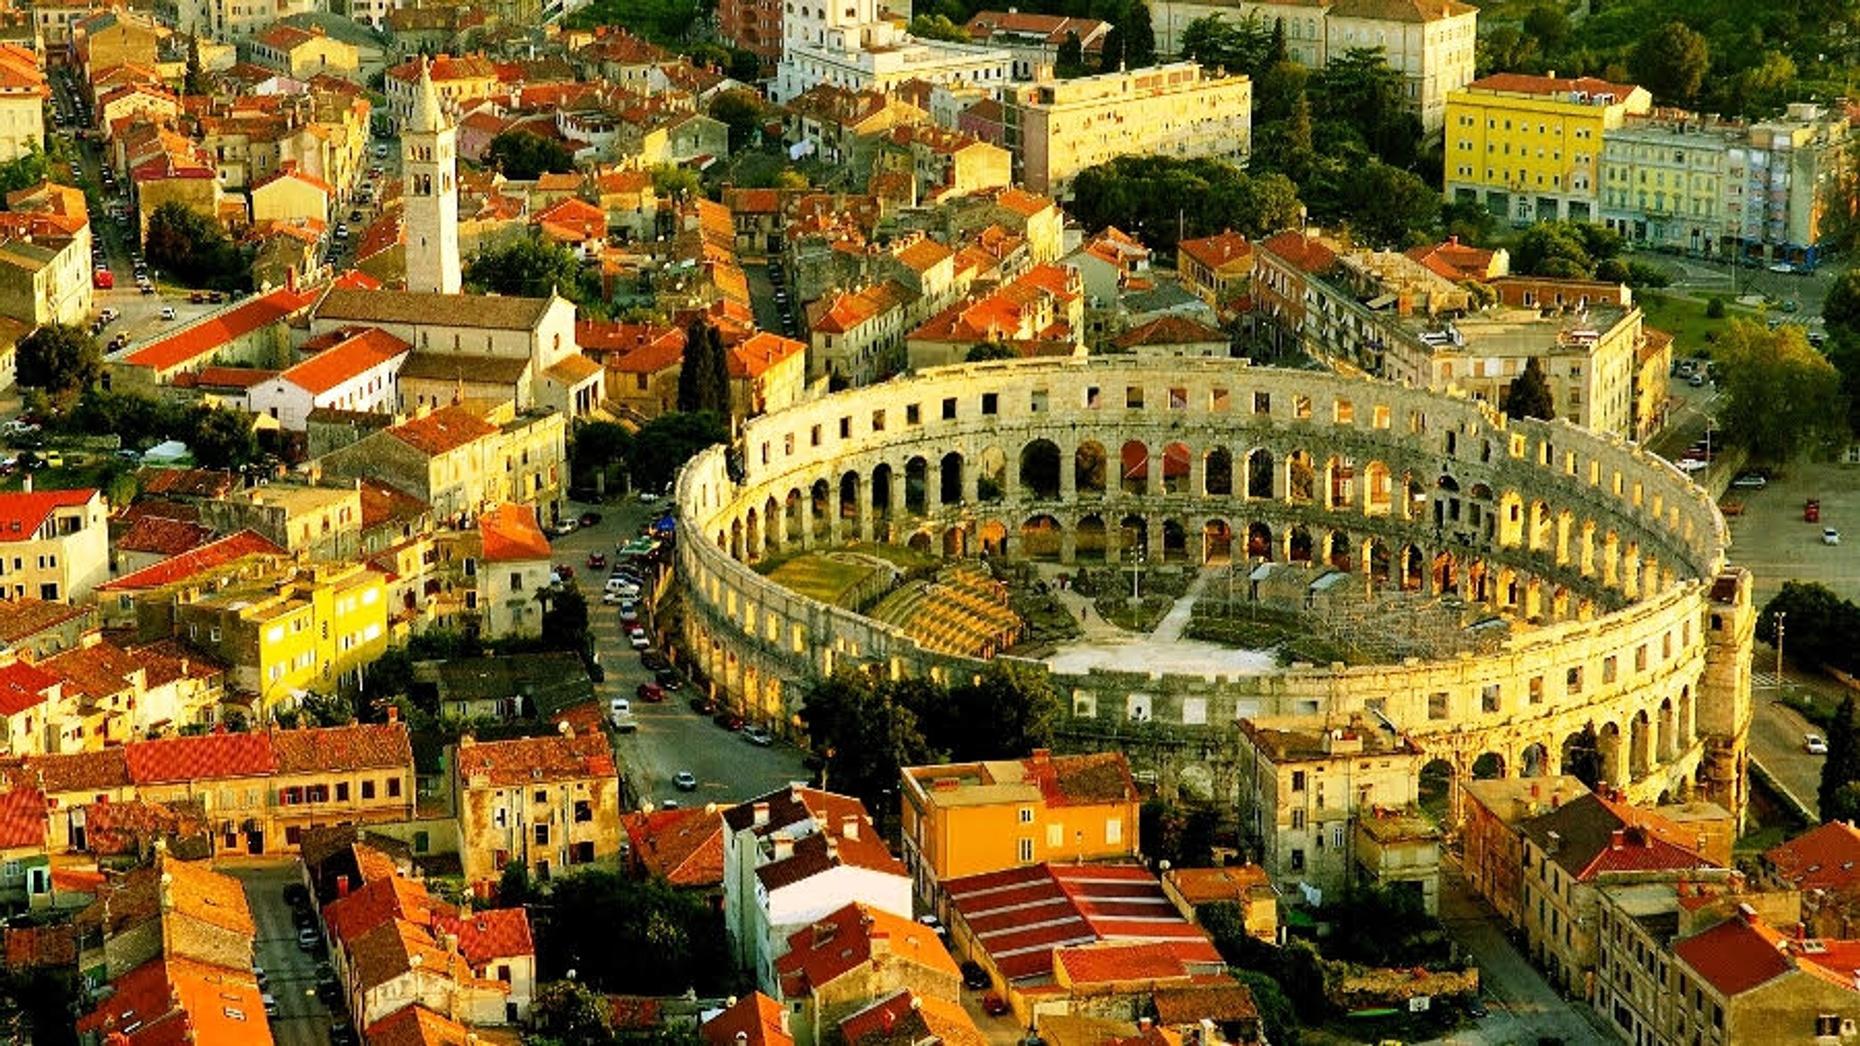 Pula Roman Coliseum With Cheese & Olive Oil Tasting